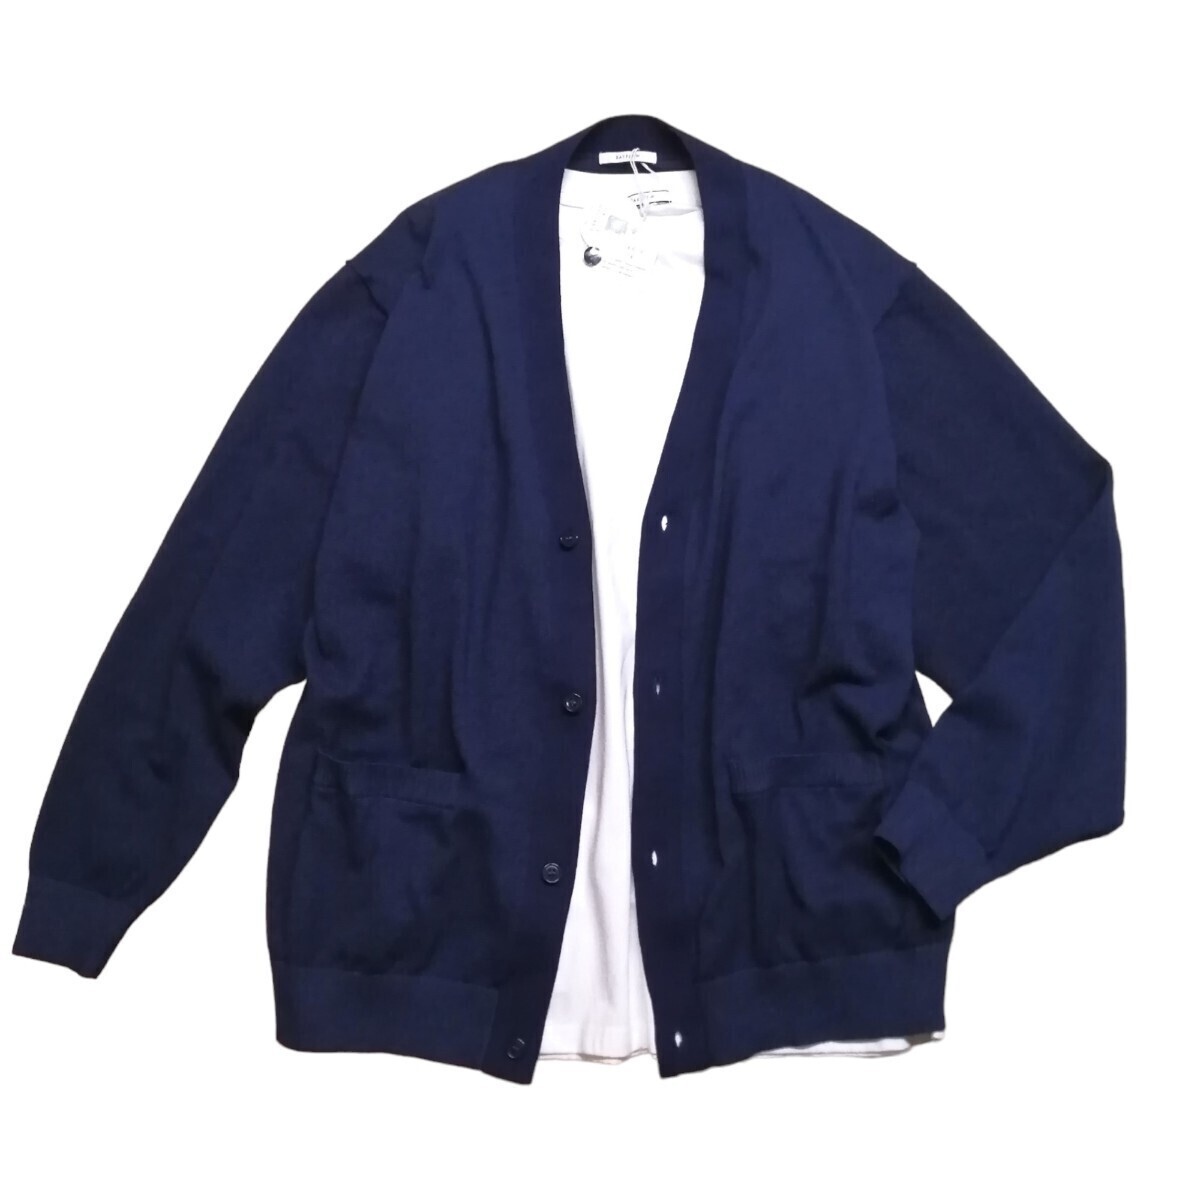 # new goods unused BAYFLOW adult .... raise navy. Layered cardigan T-shirt attaching cooling measures * L size4 Bay flow 